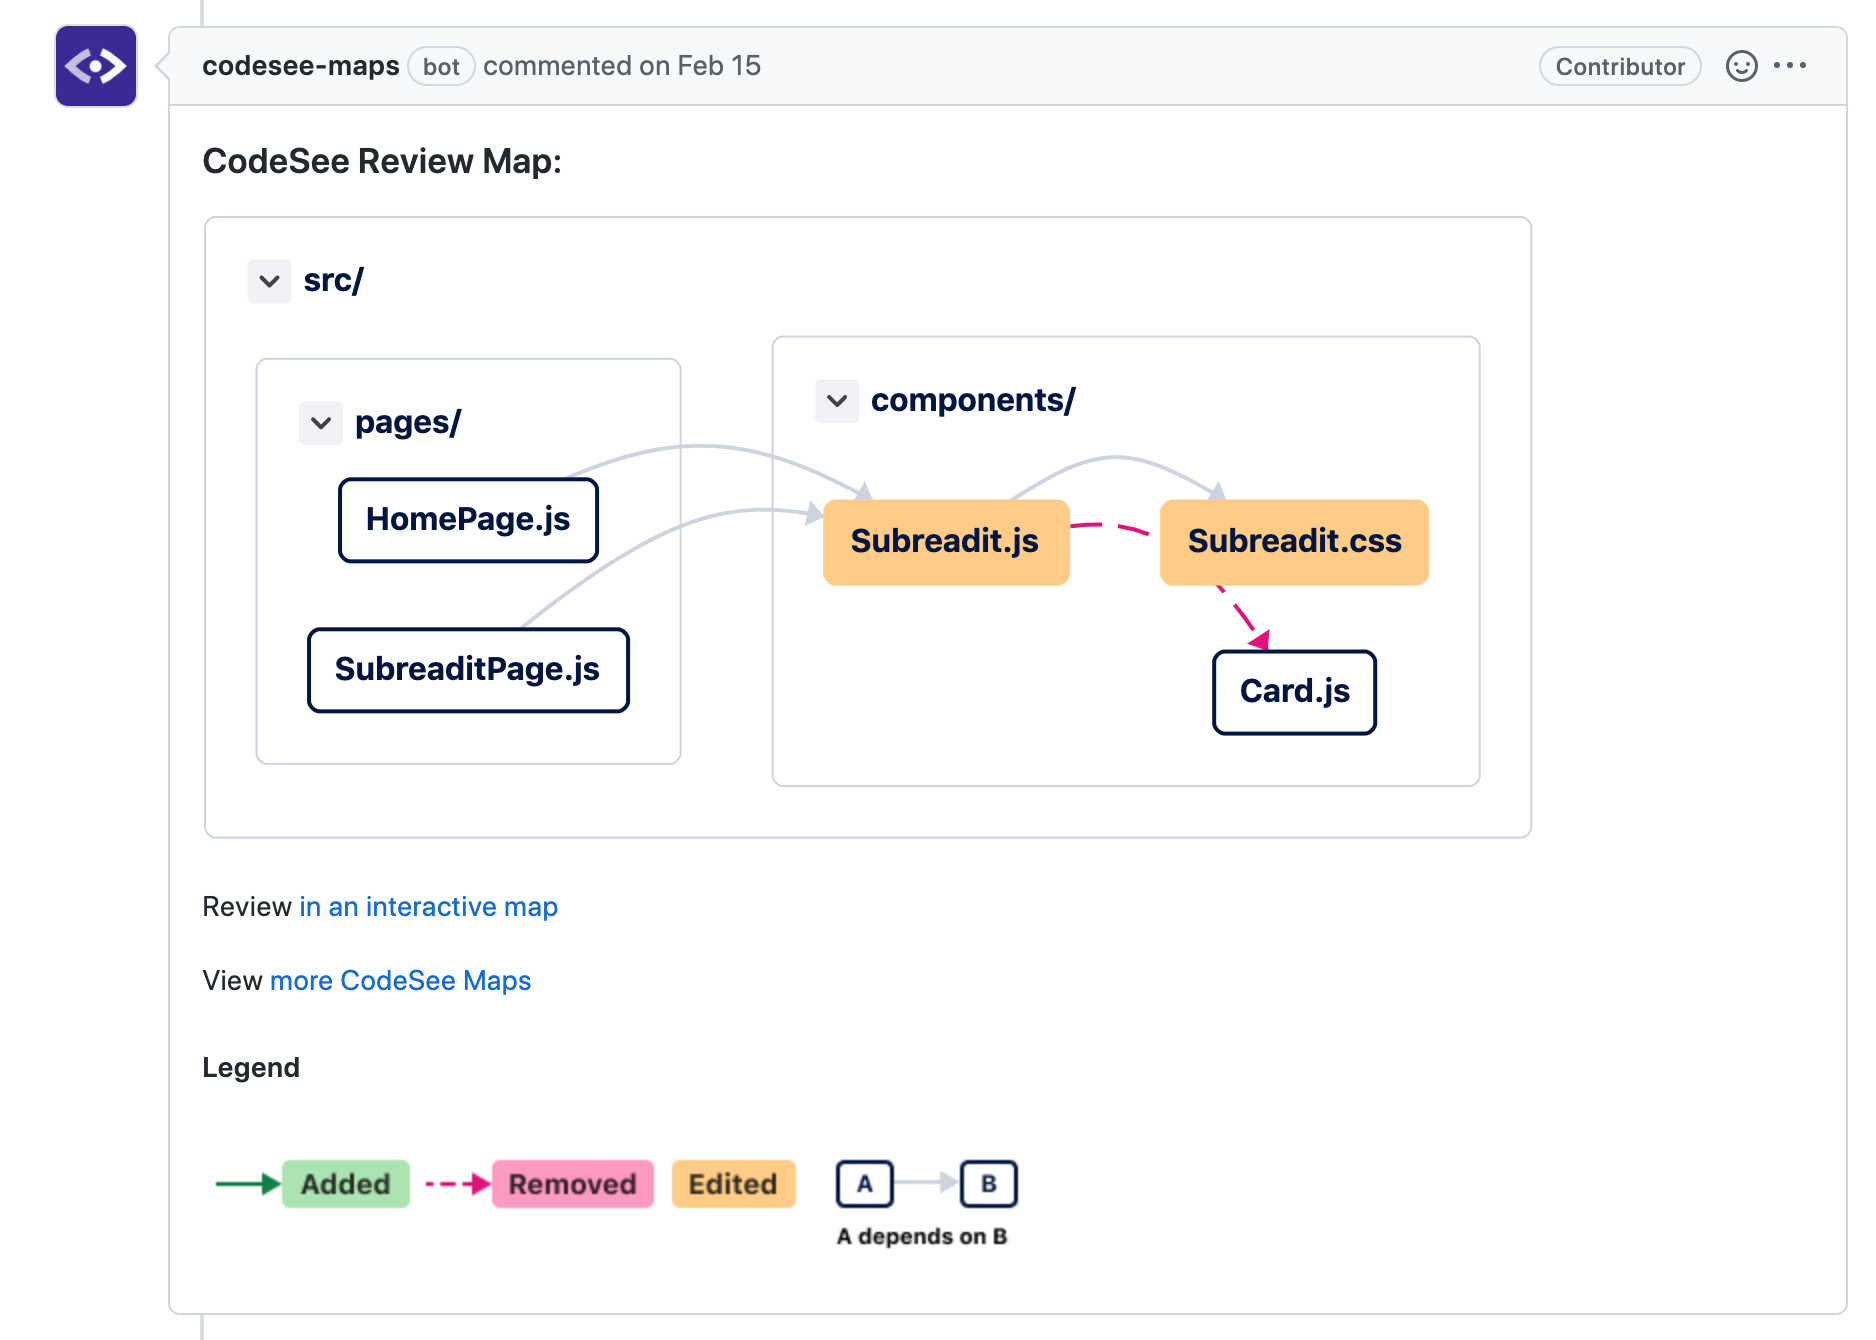 CodeSee Review Maps example on a pull request